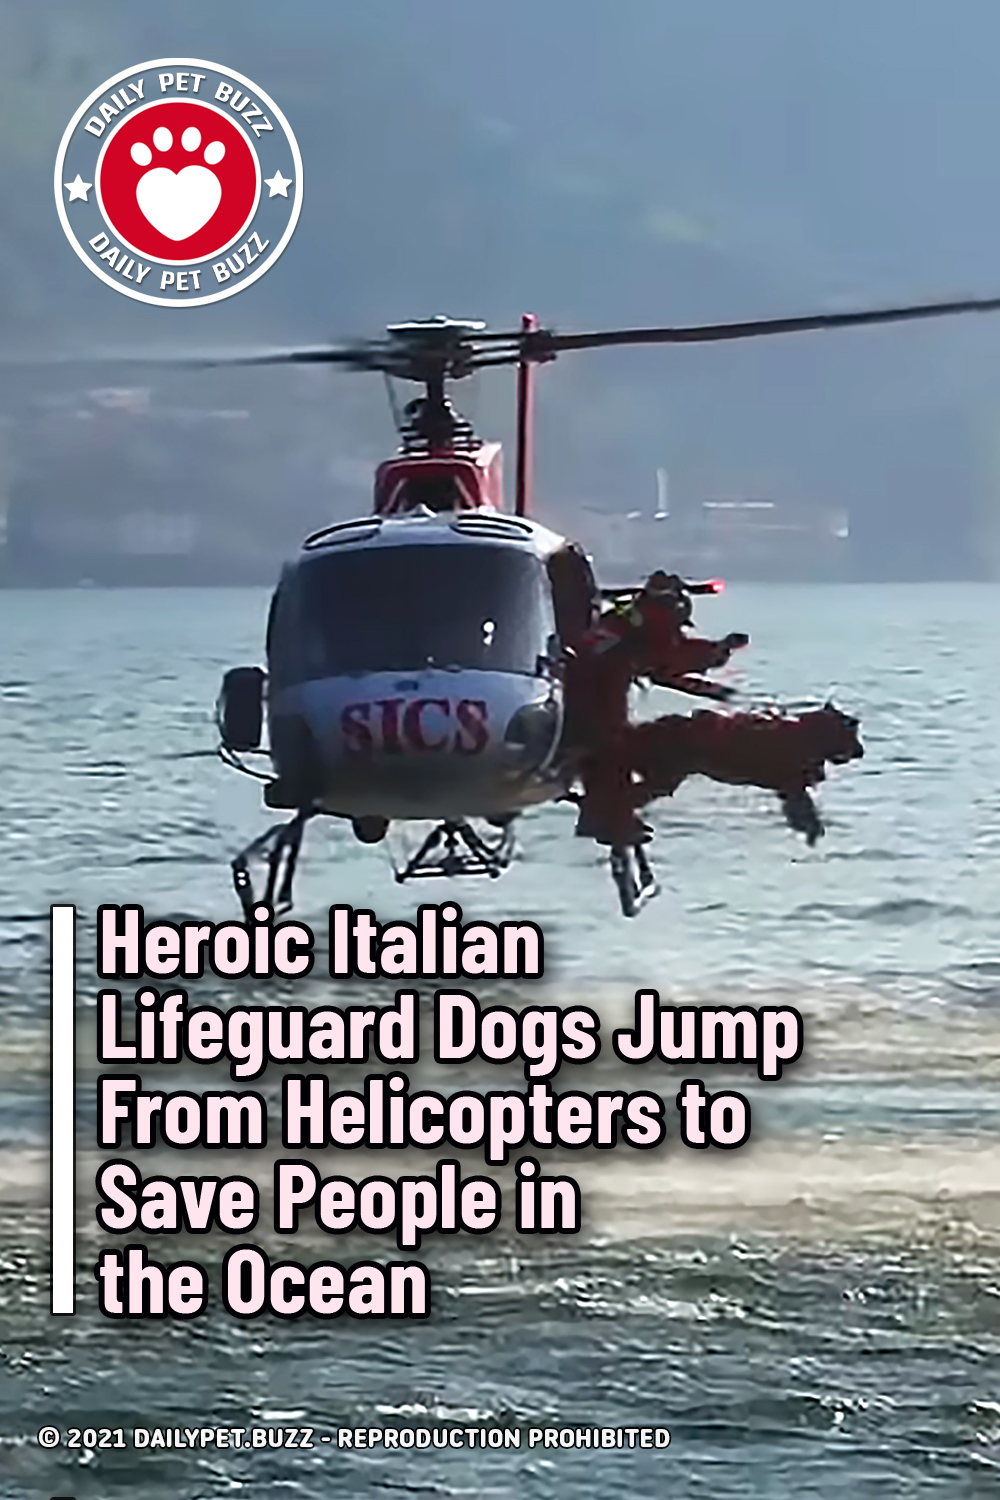 Heroic Italian Lifeguard Dogs Jump From Helicopters to Save People in the Ocean